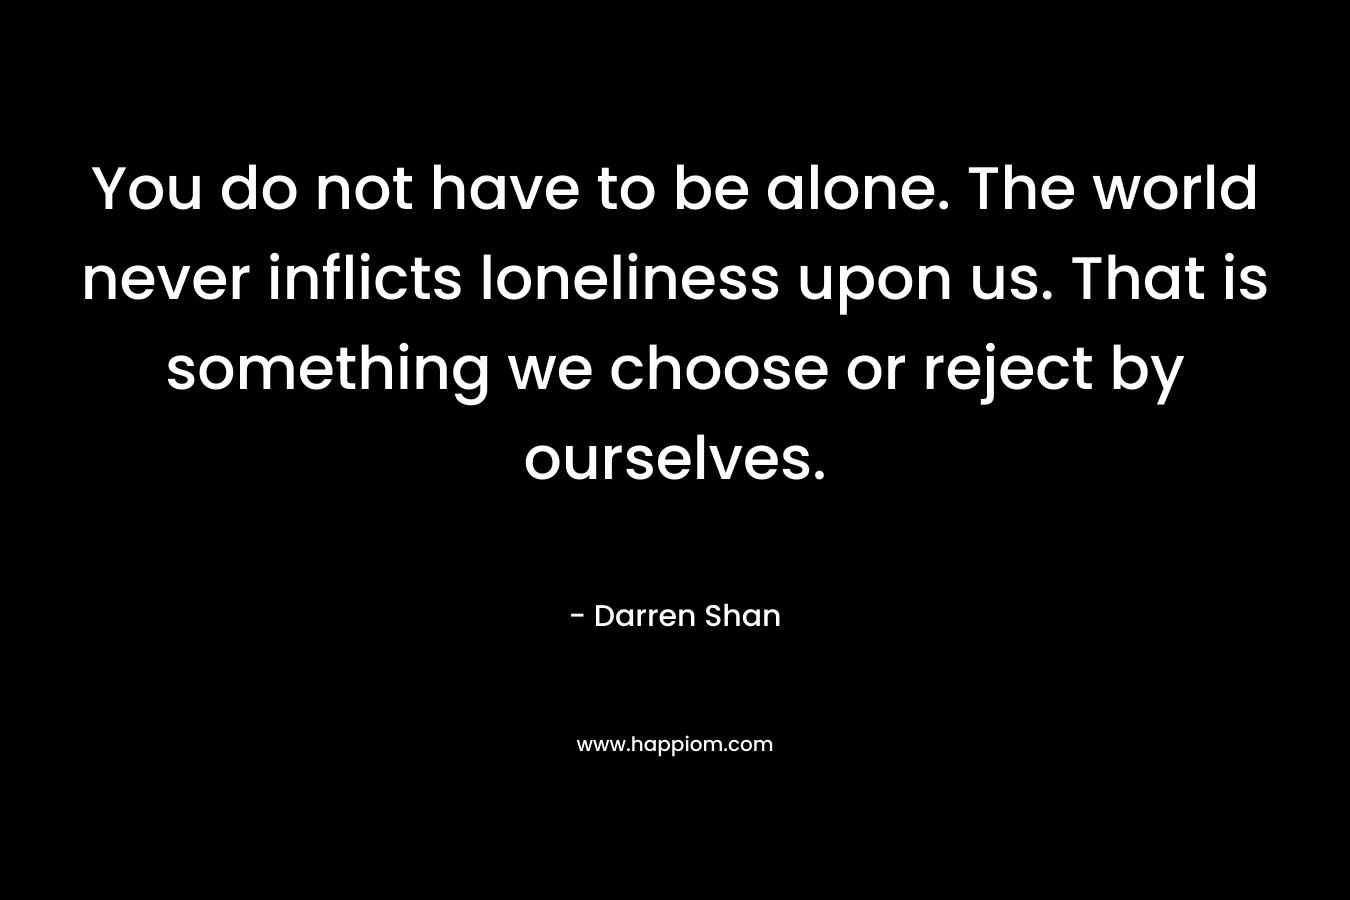 You do not have to be alone. The world never inflicts loneliness upon us. That is something we choose or reject by ourselves.